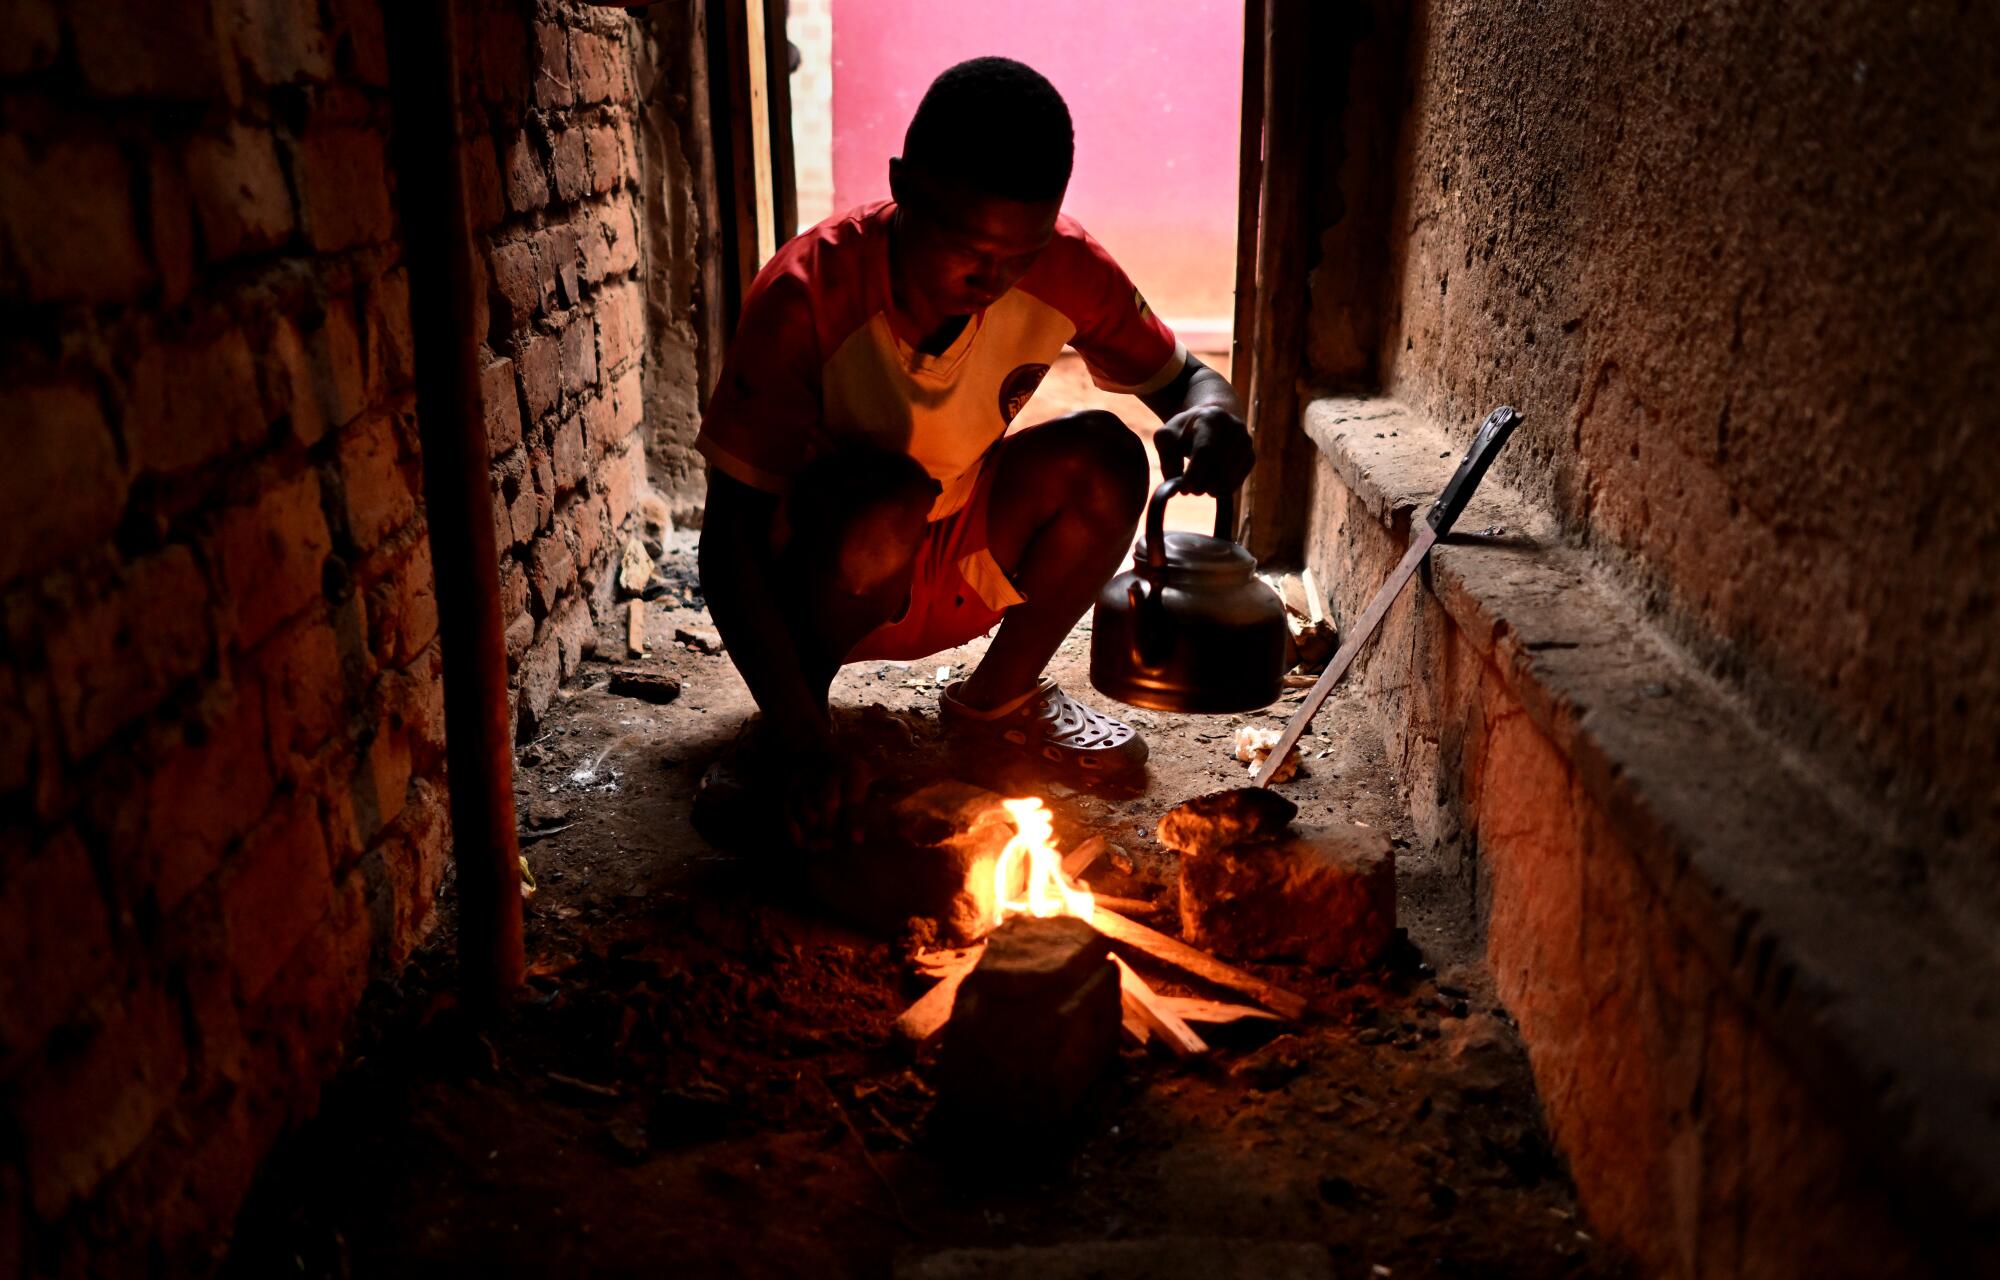 Dennis Kasumba lights a fire to make tea for his grandmother at their home in Uganda.